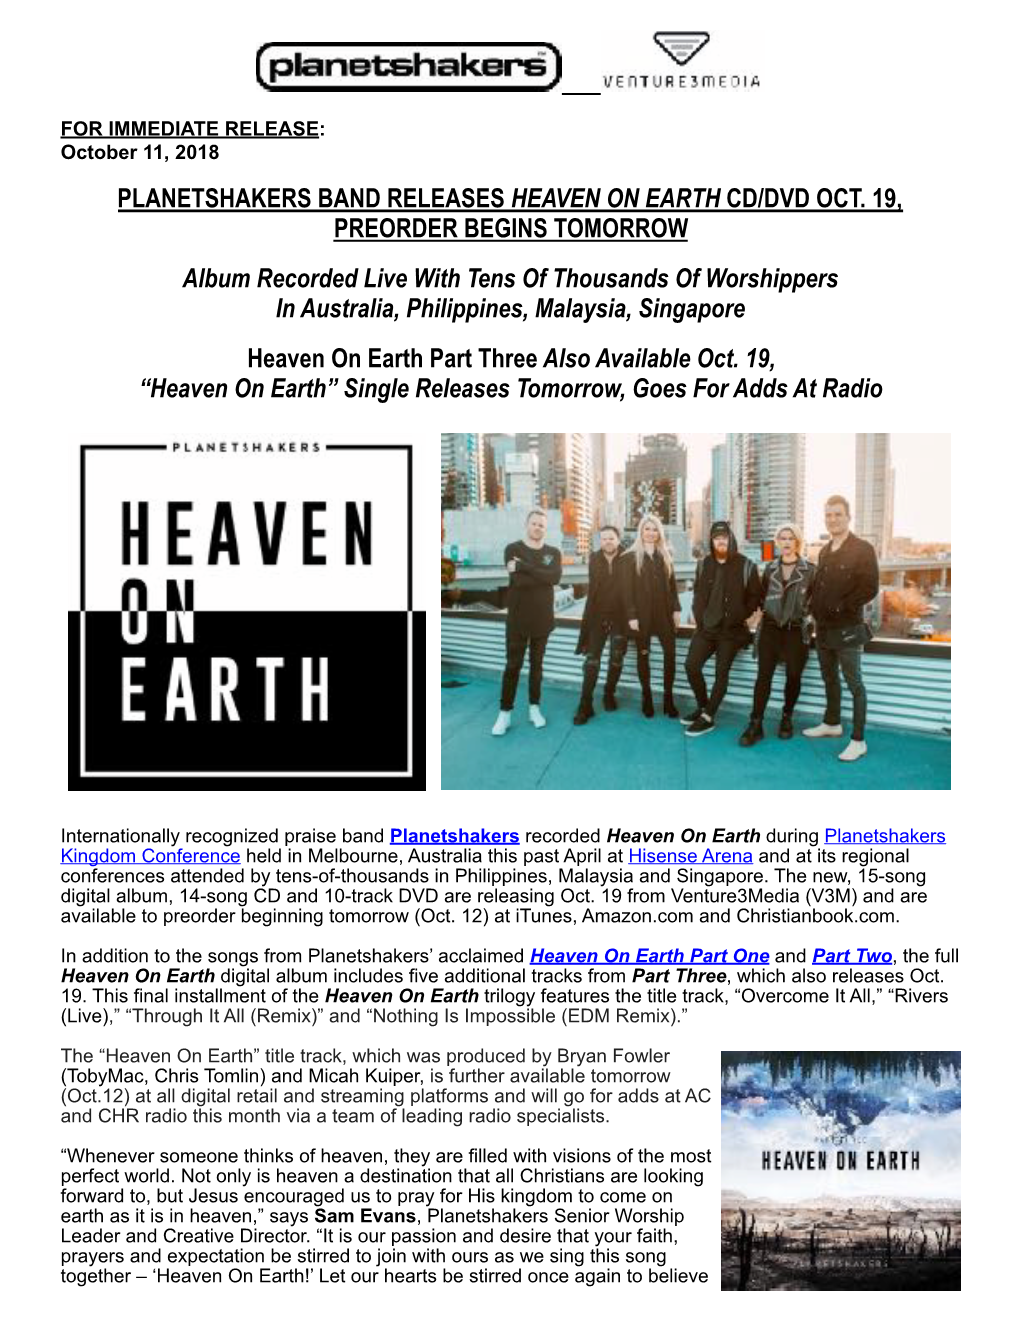 Planetshakers Band Releases Heaven on Earth Cd/Dvd Oct. 19